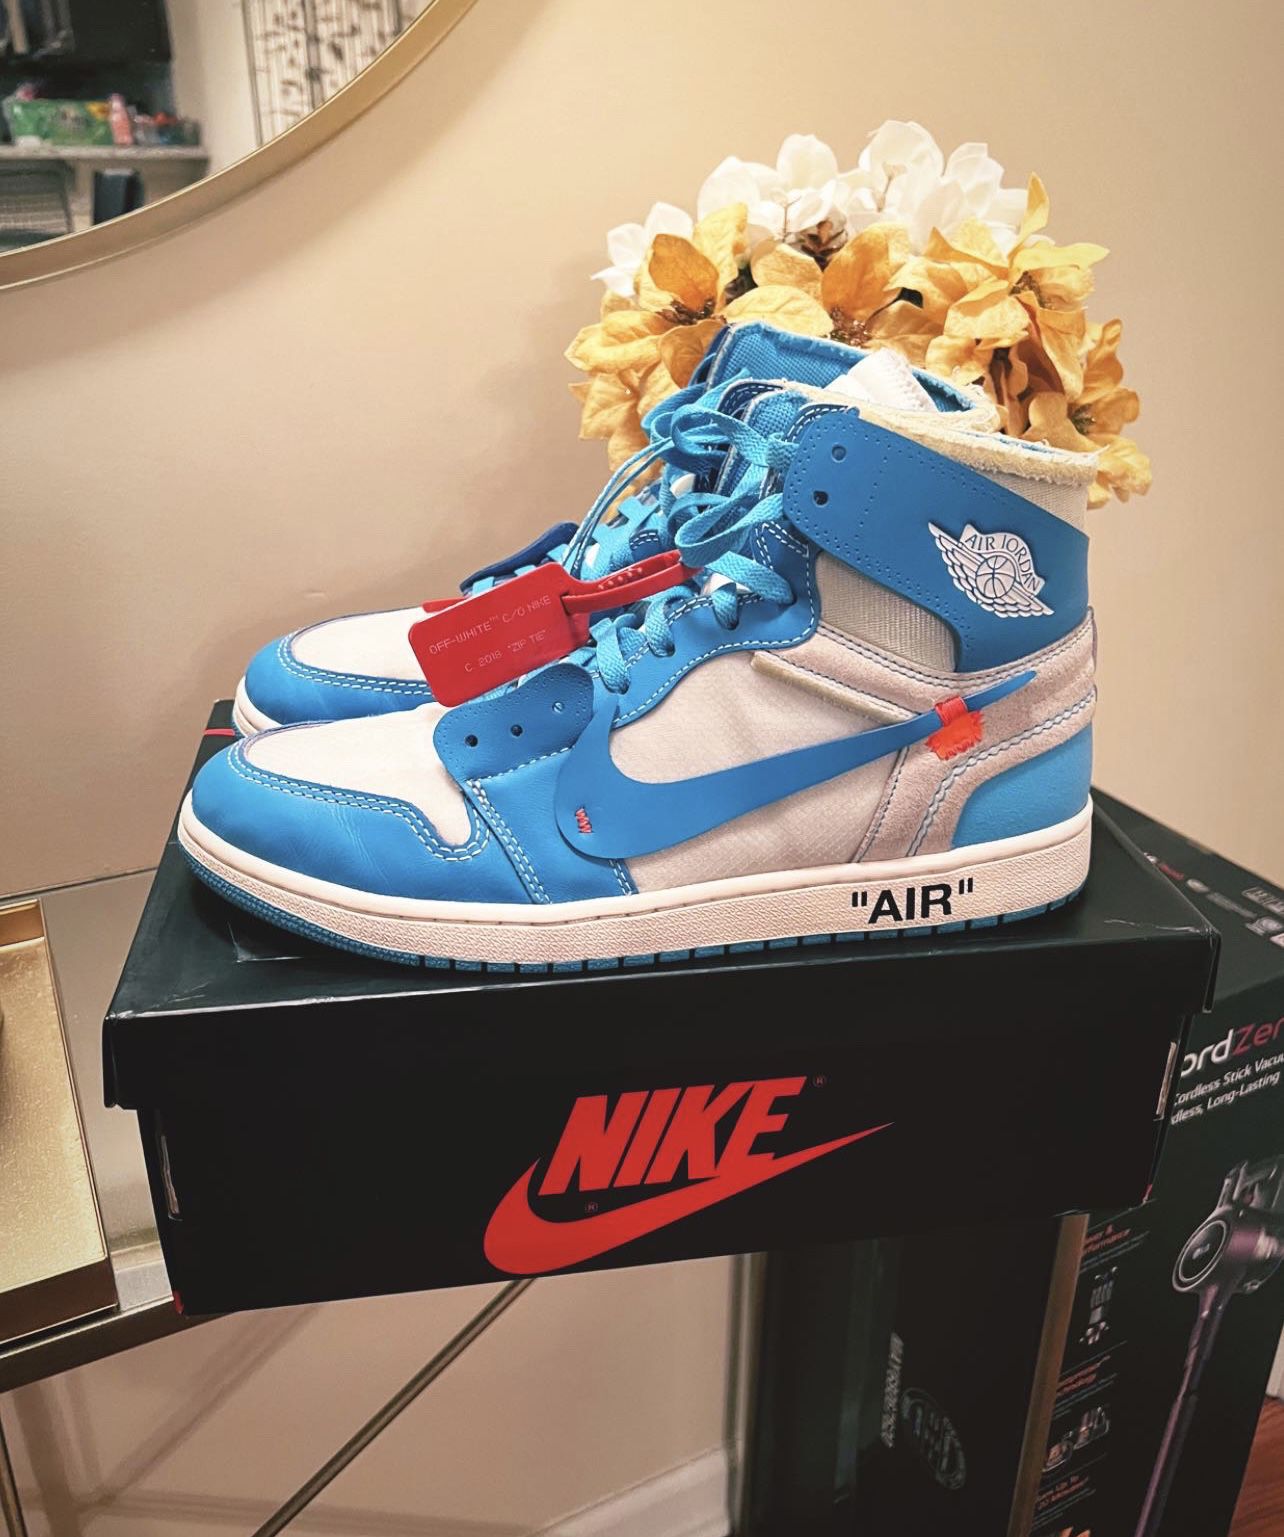 Off White Air Jordan 1s Unc (Size 12) for Sale in Jersey City, NJ - OfferUp